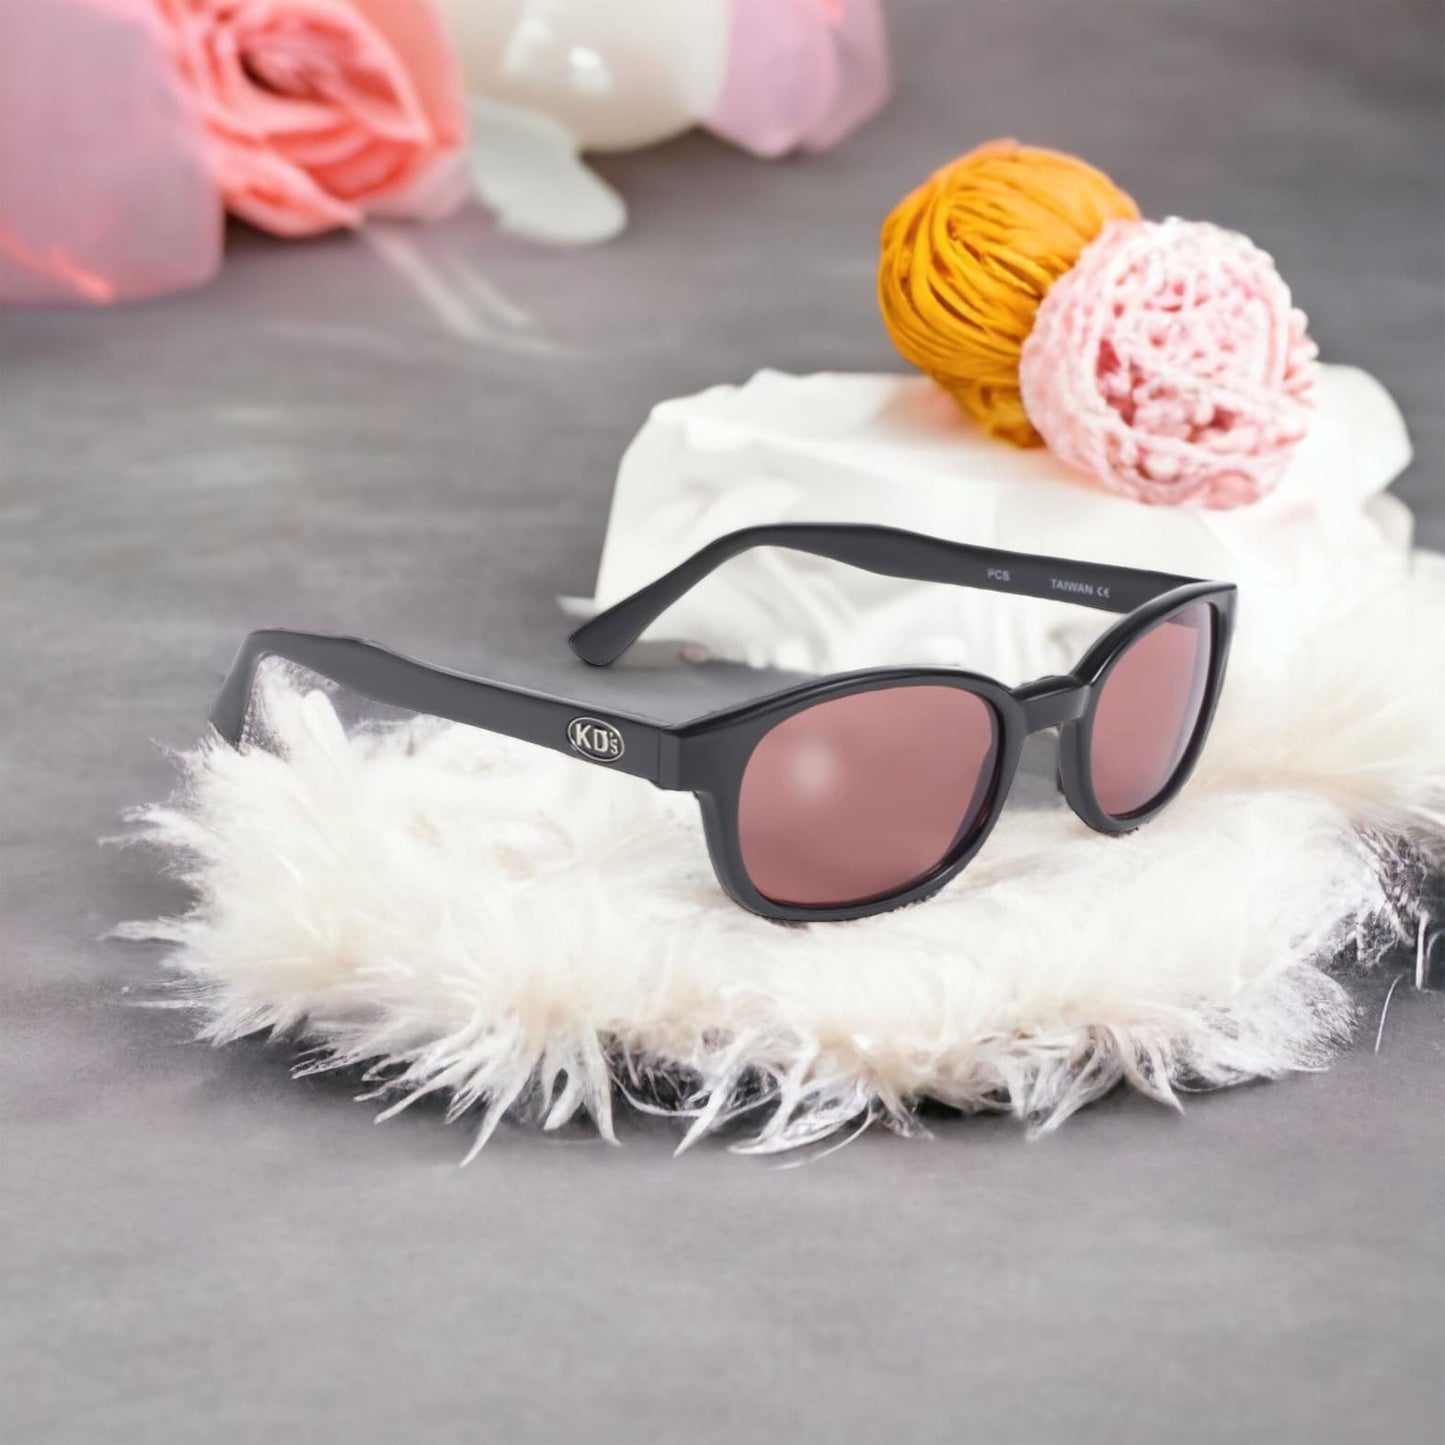 Large original X-KD's Crystal 12120 sunglasses with solid black frames and pink tinted polycarbonate lenses set on feather furniture.